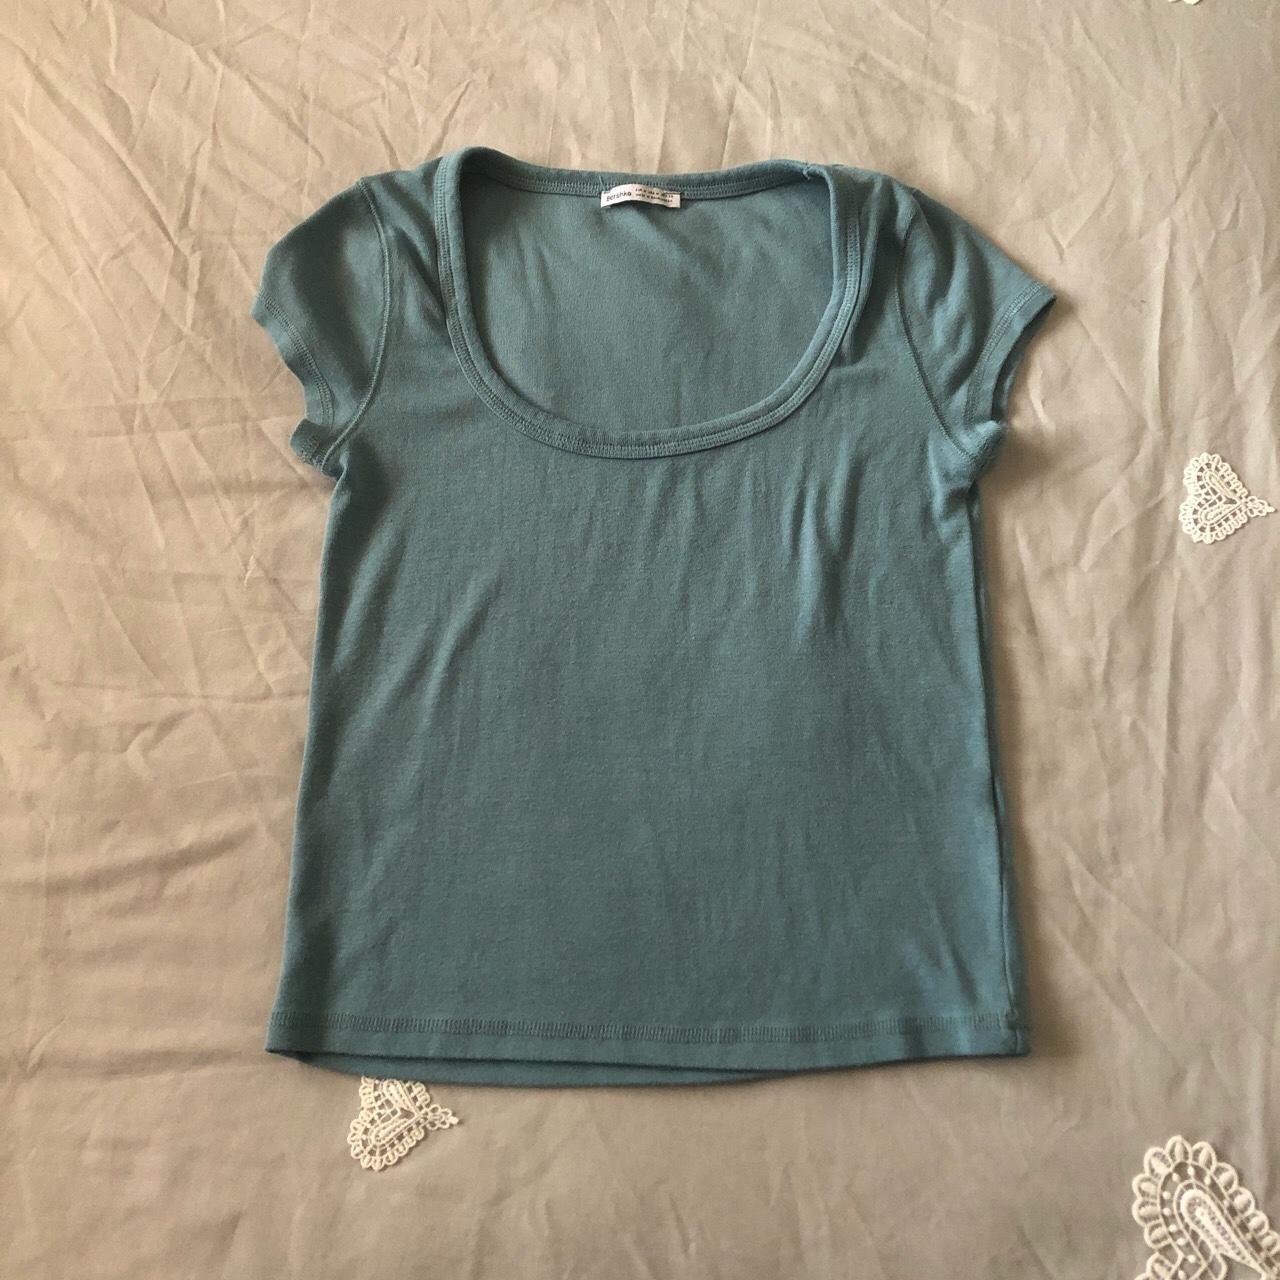 Good condition Short sleeve blue turquoise top... - Depop